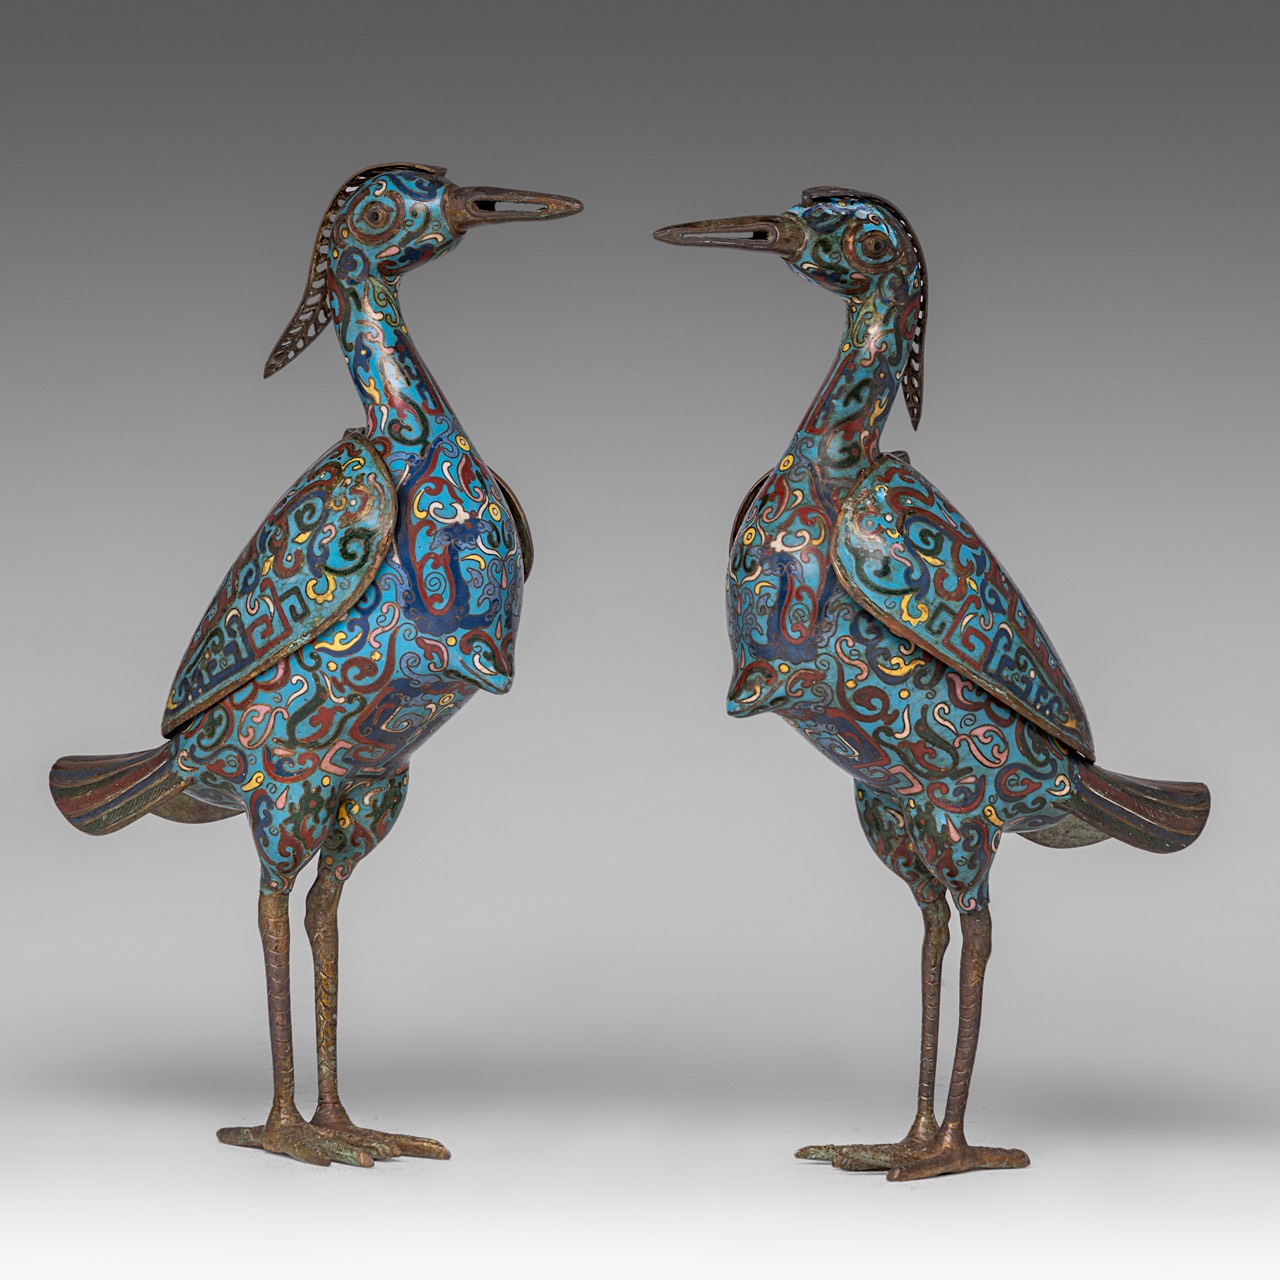 A pair of Chinese cloisonne enamelled bronze cranes, 20thC, both H 35 cm